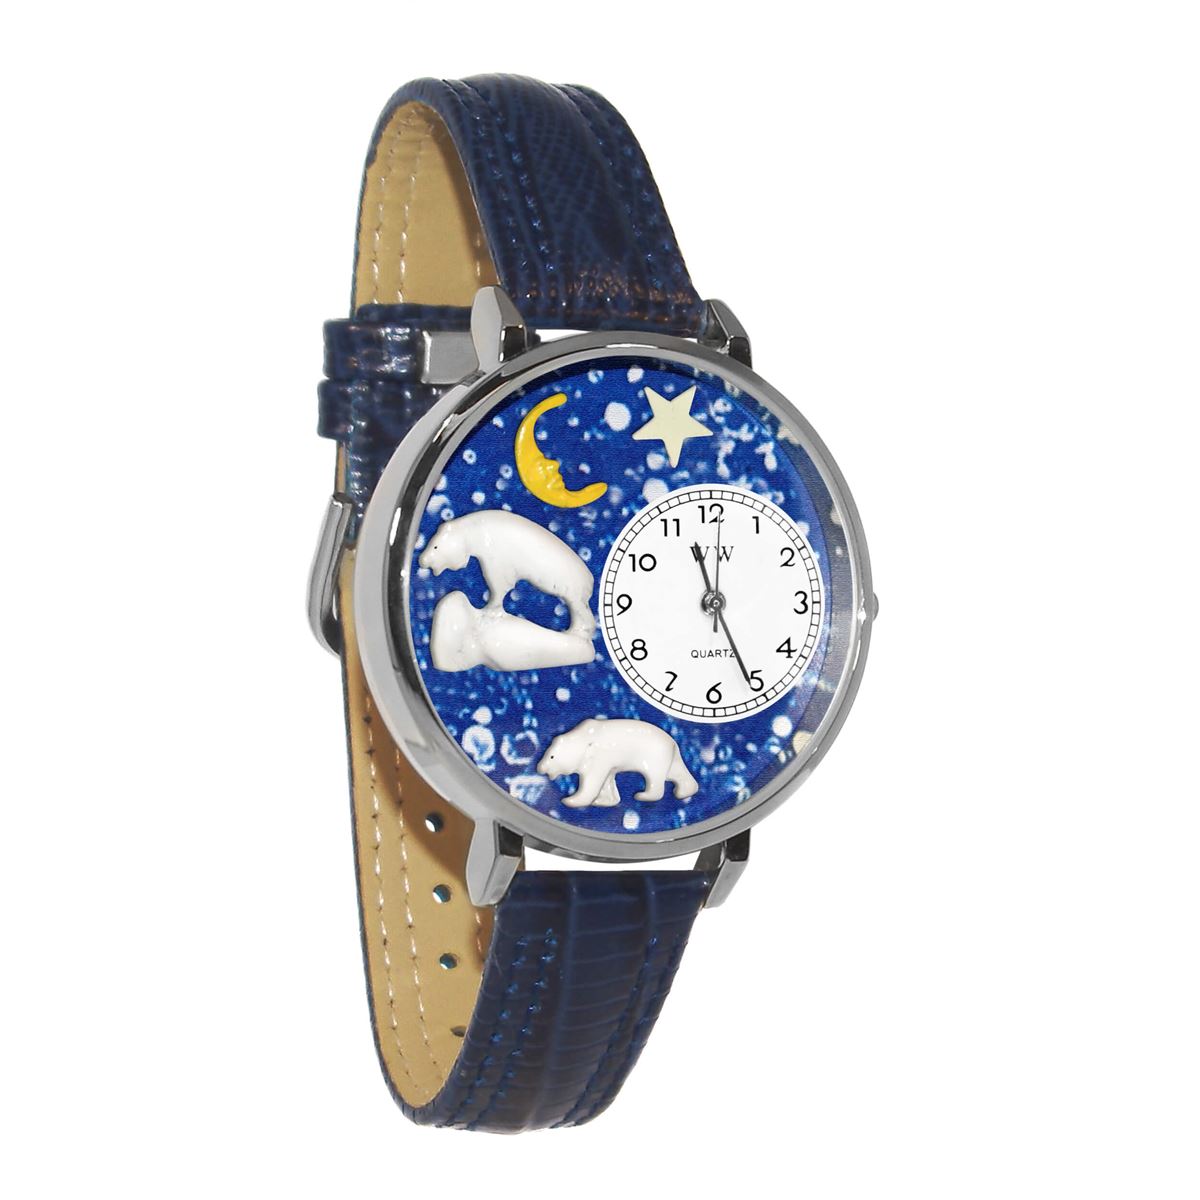 Whimsical Gifts | Polar Bear 3D Watch Large Style | Handmade in USA | Animal Lover | Zoo & Sealife | Novelty Unique Fun Miniatures Gift | Silver Finish Navy Blue Leather Watch Band